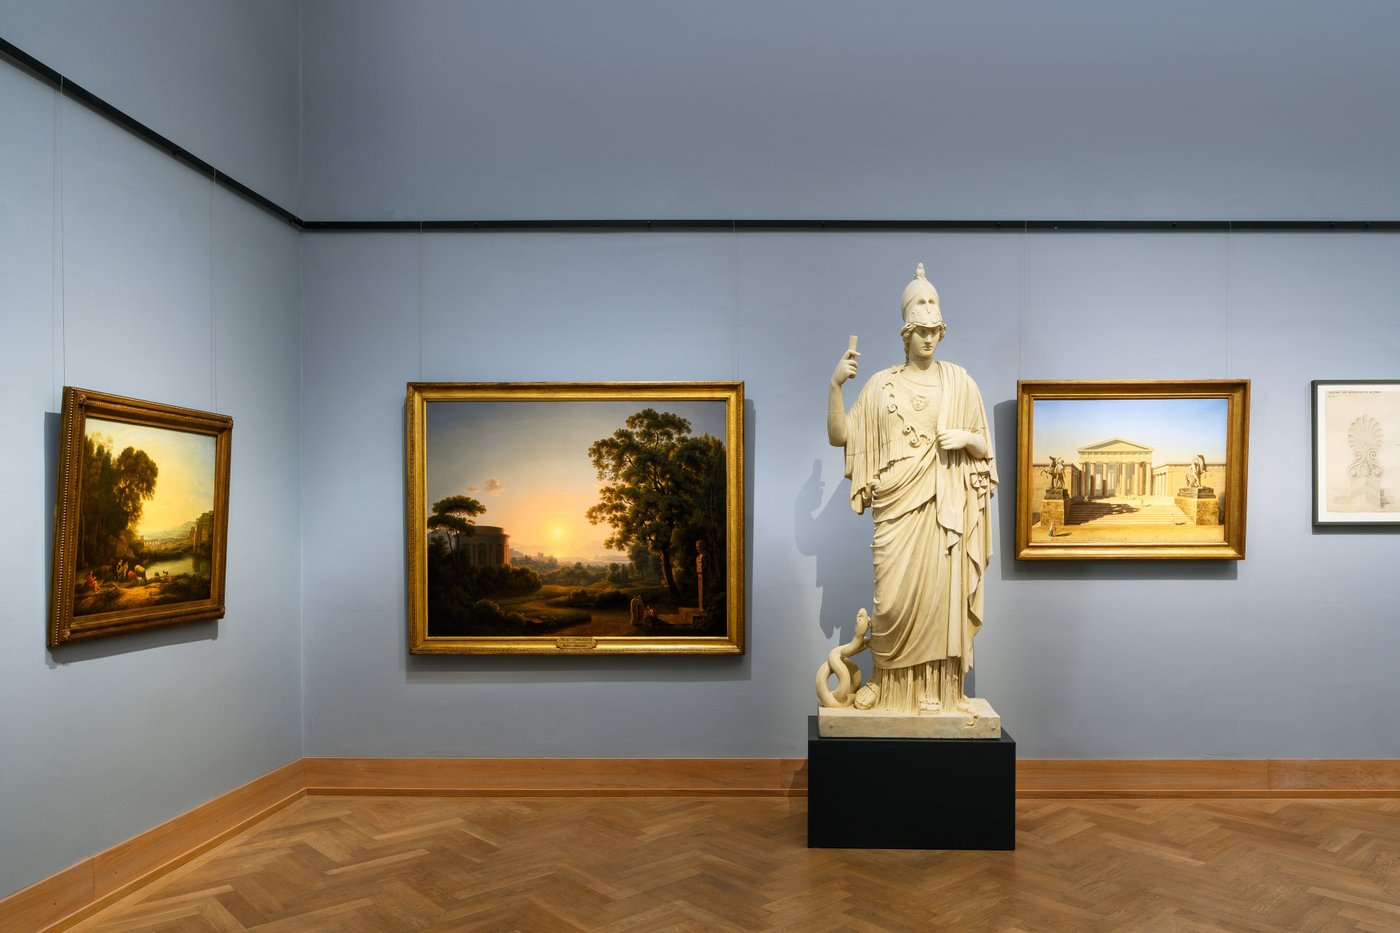 exhibition view with paintings on the wall and a greek statute